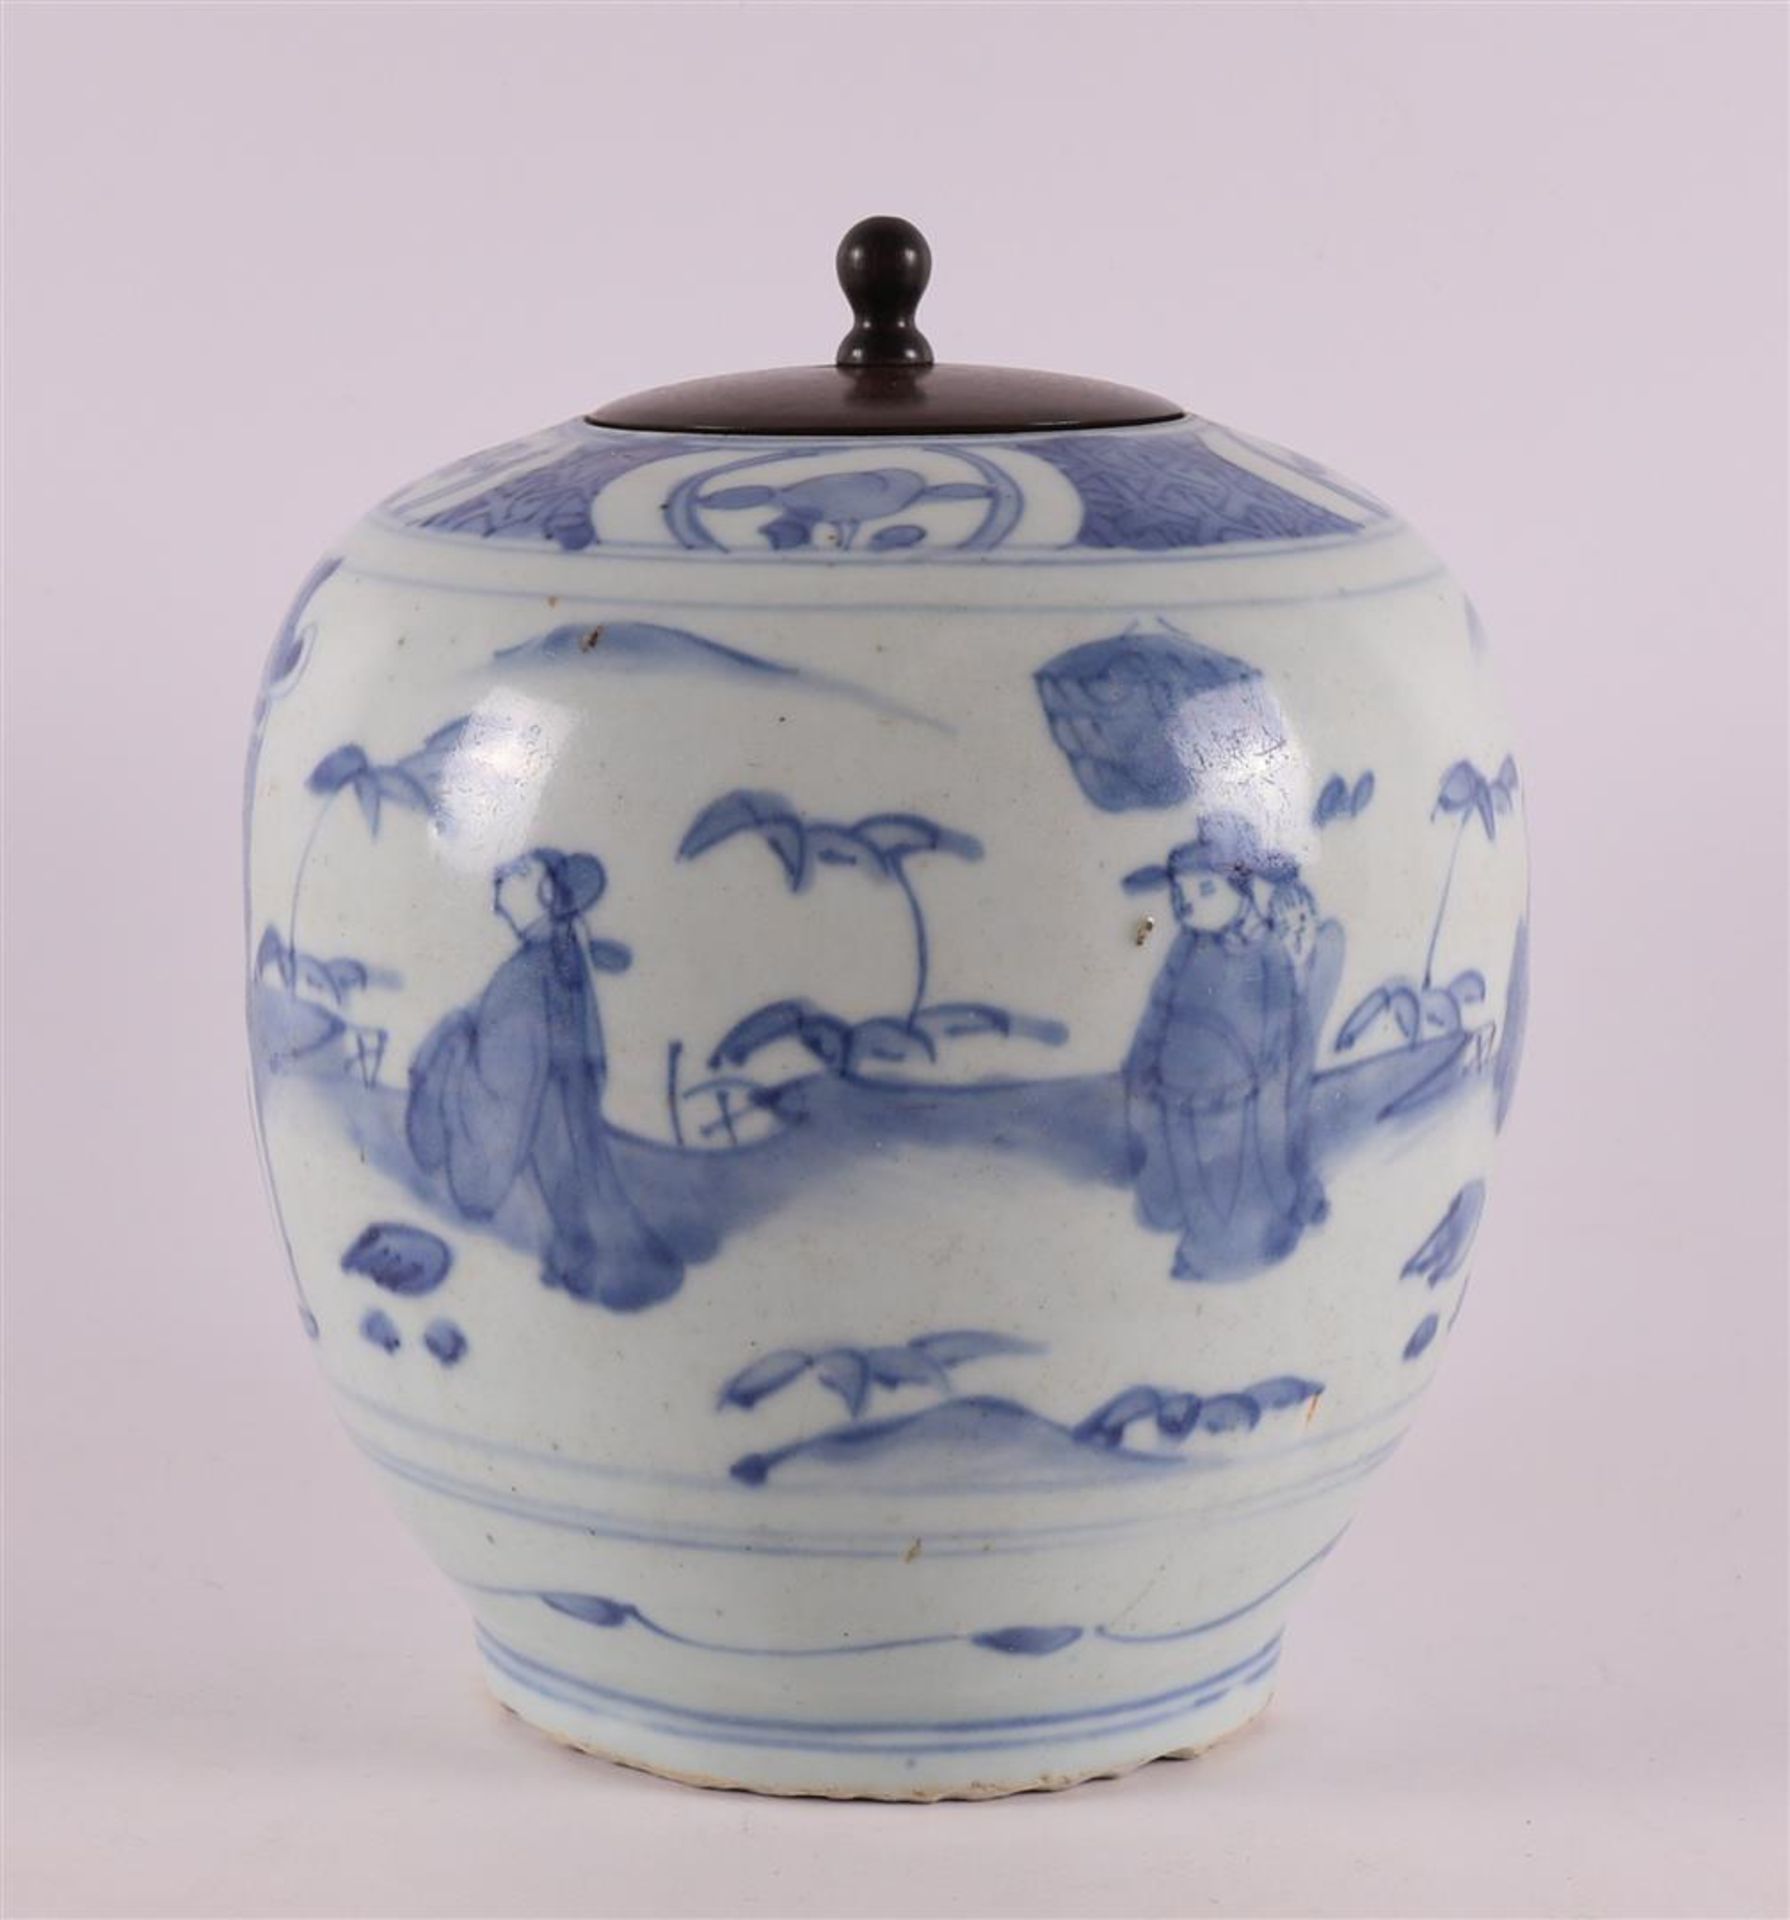 A blue and white porcelain lidded jar with wooden lid, China, Transition/Kangxi, 17th century.